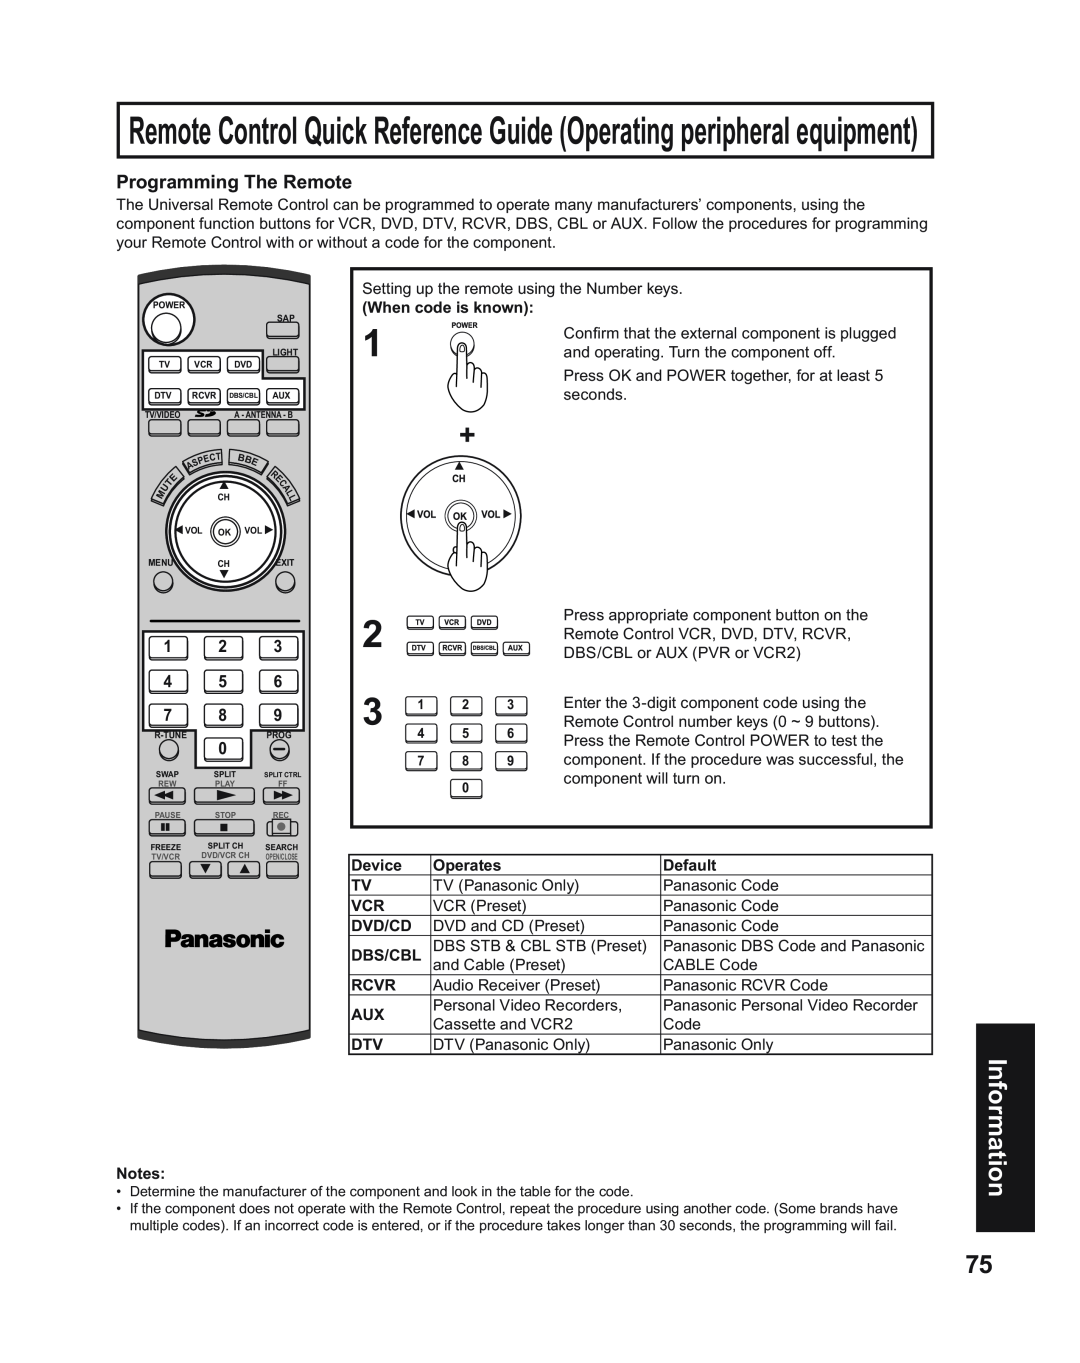 Panasonic PT-43LC14 Remote Control Quick Reference Guide Operating peripheral equipment, Programming The Remote, Device 